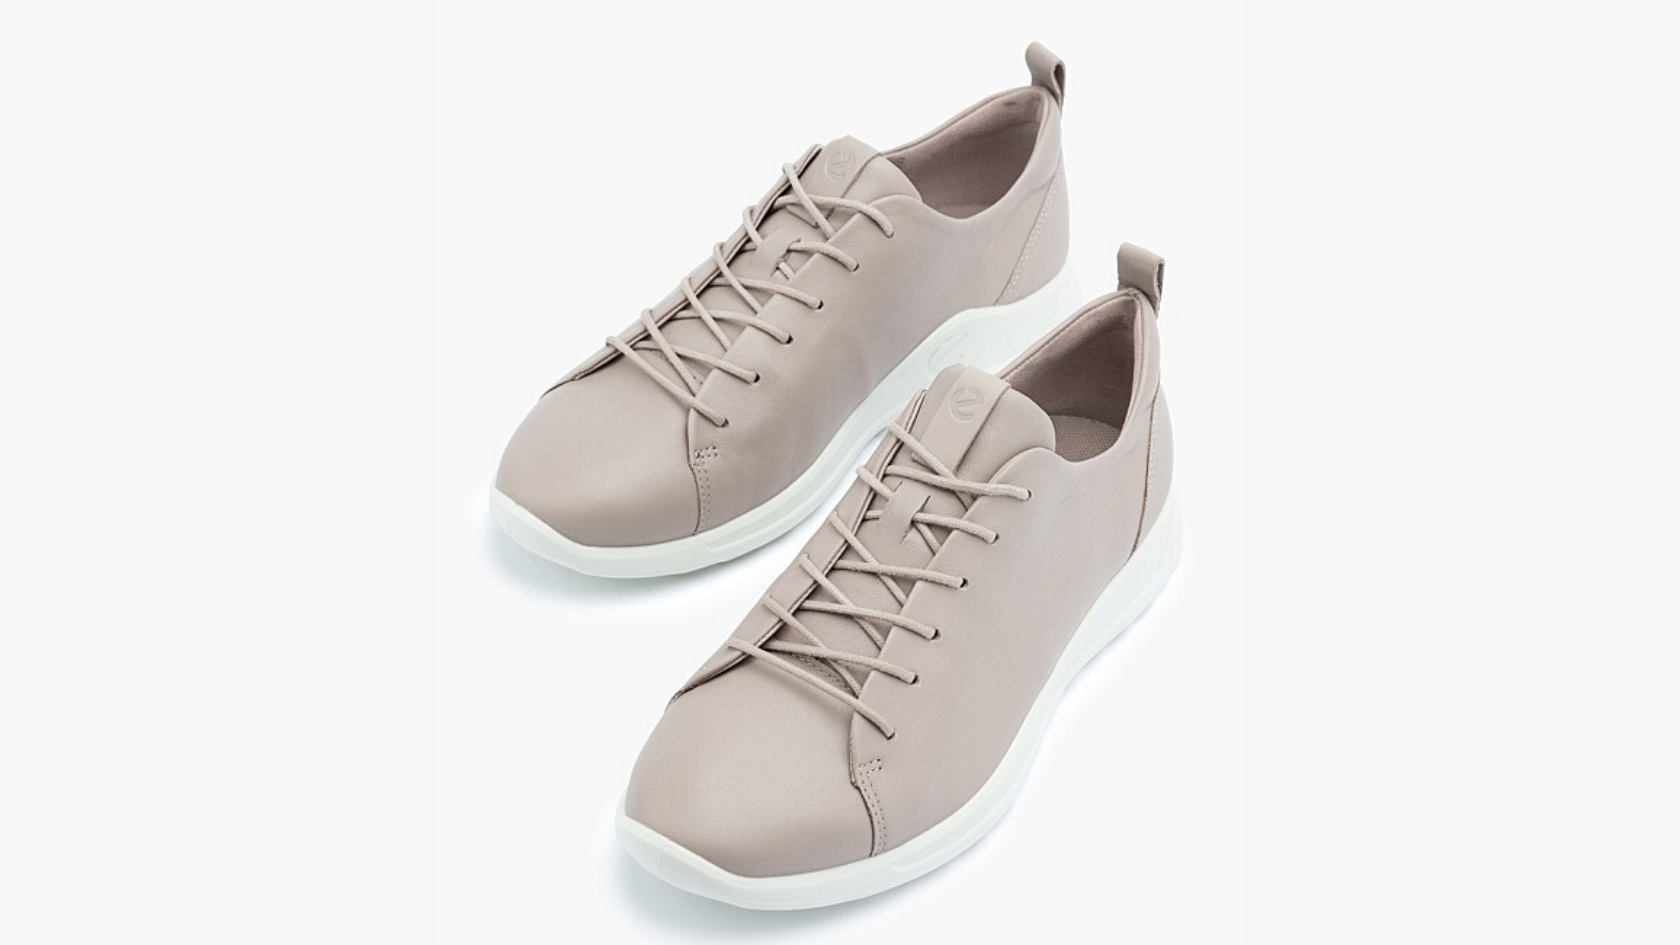 A pair of taupe leather lace-up sneakers against a neutral background.  